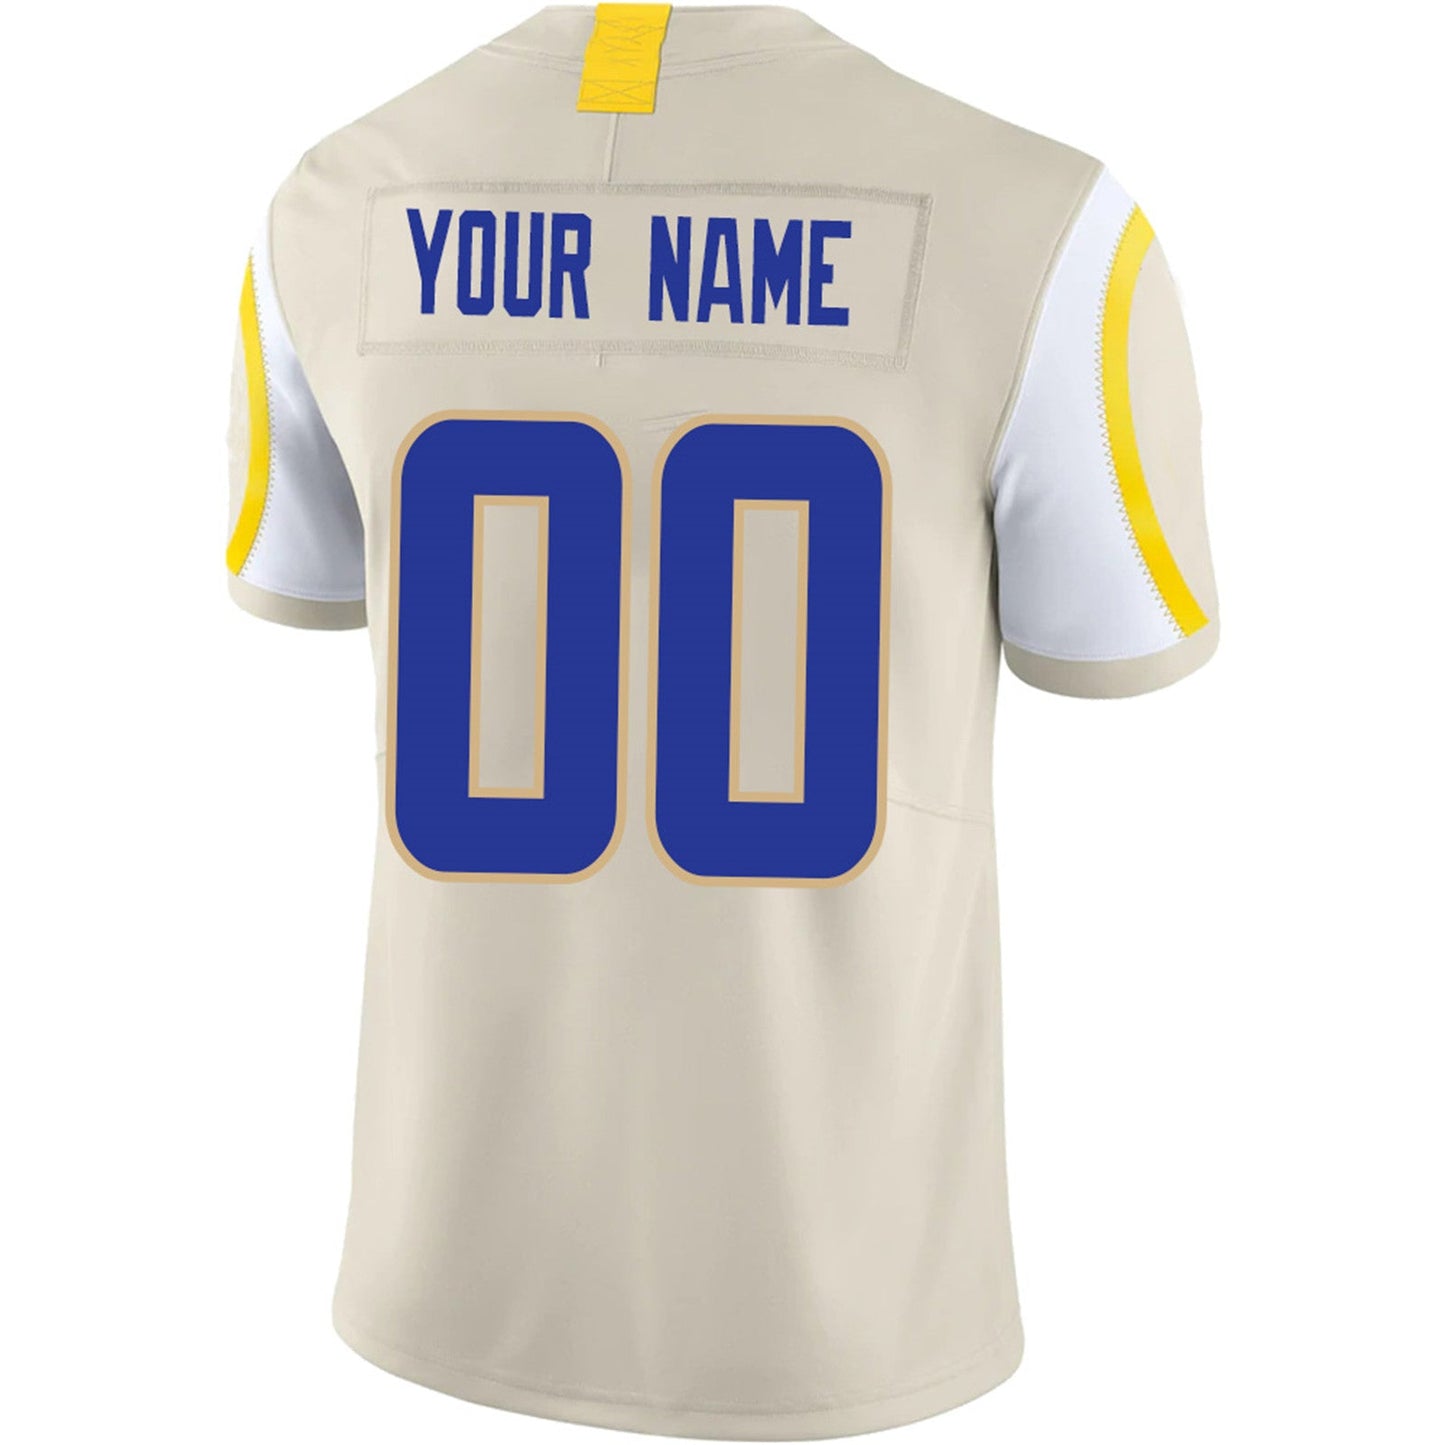 Custom LA.Rams Football Jerseys Team Player or Personalized Design Your Own Name for Men's Women's Youth Jerseys Navy